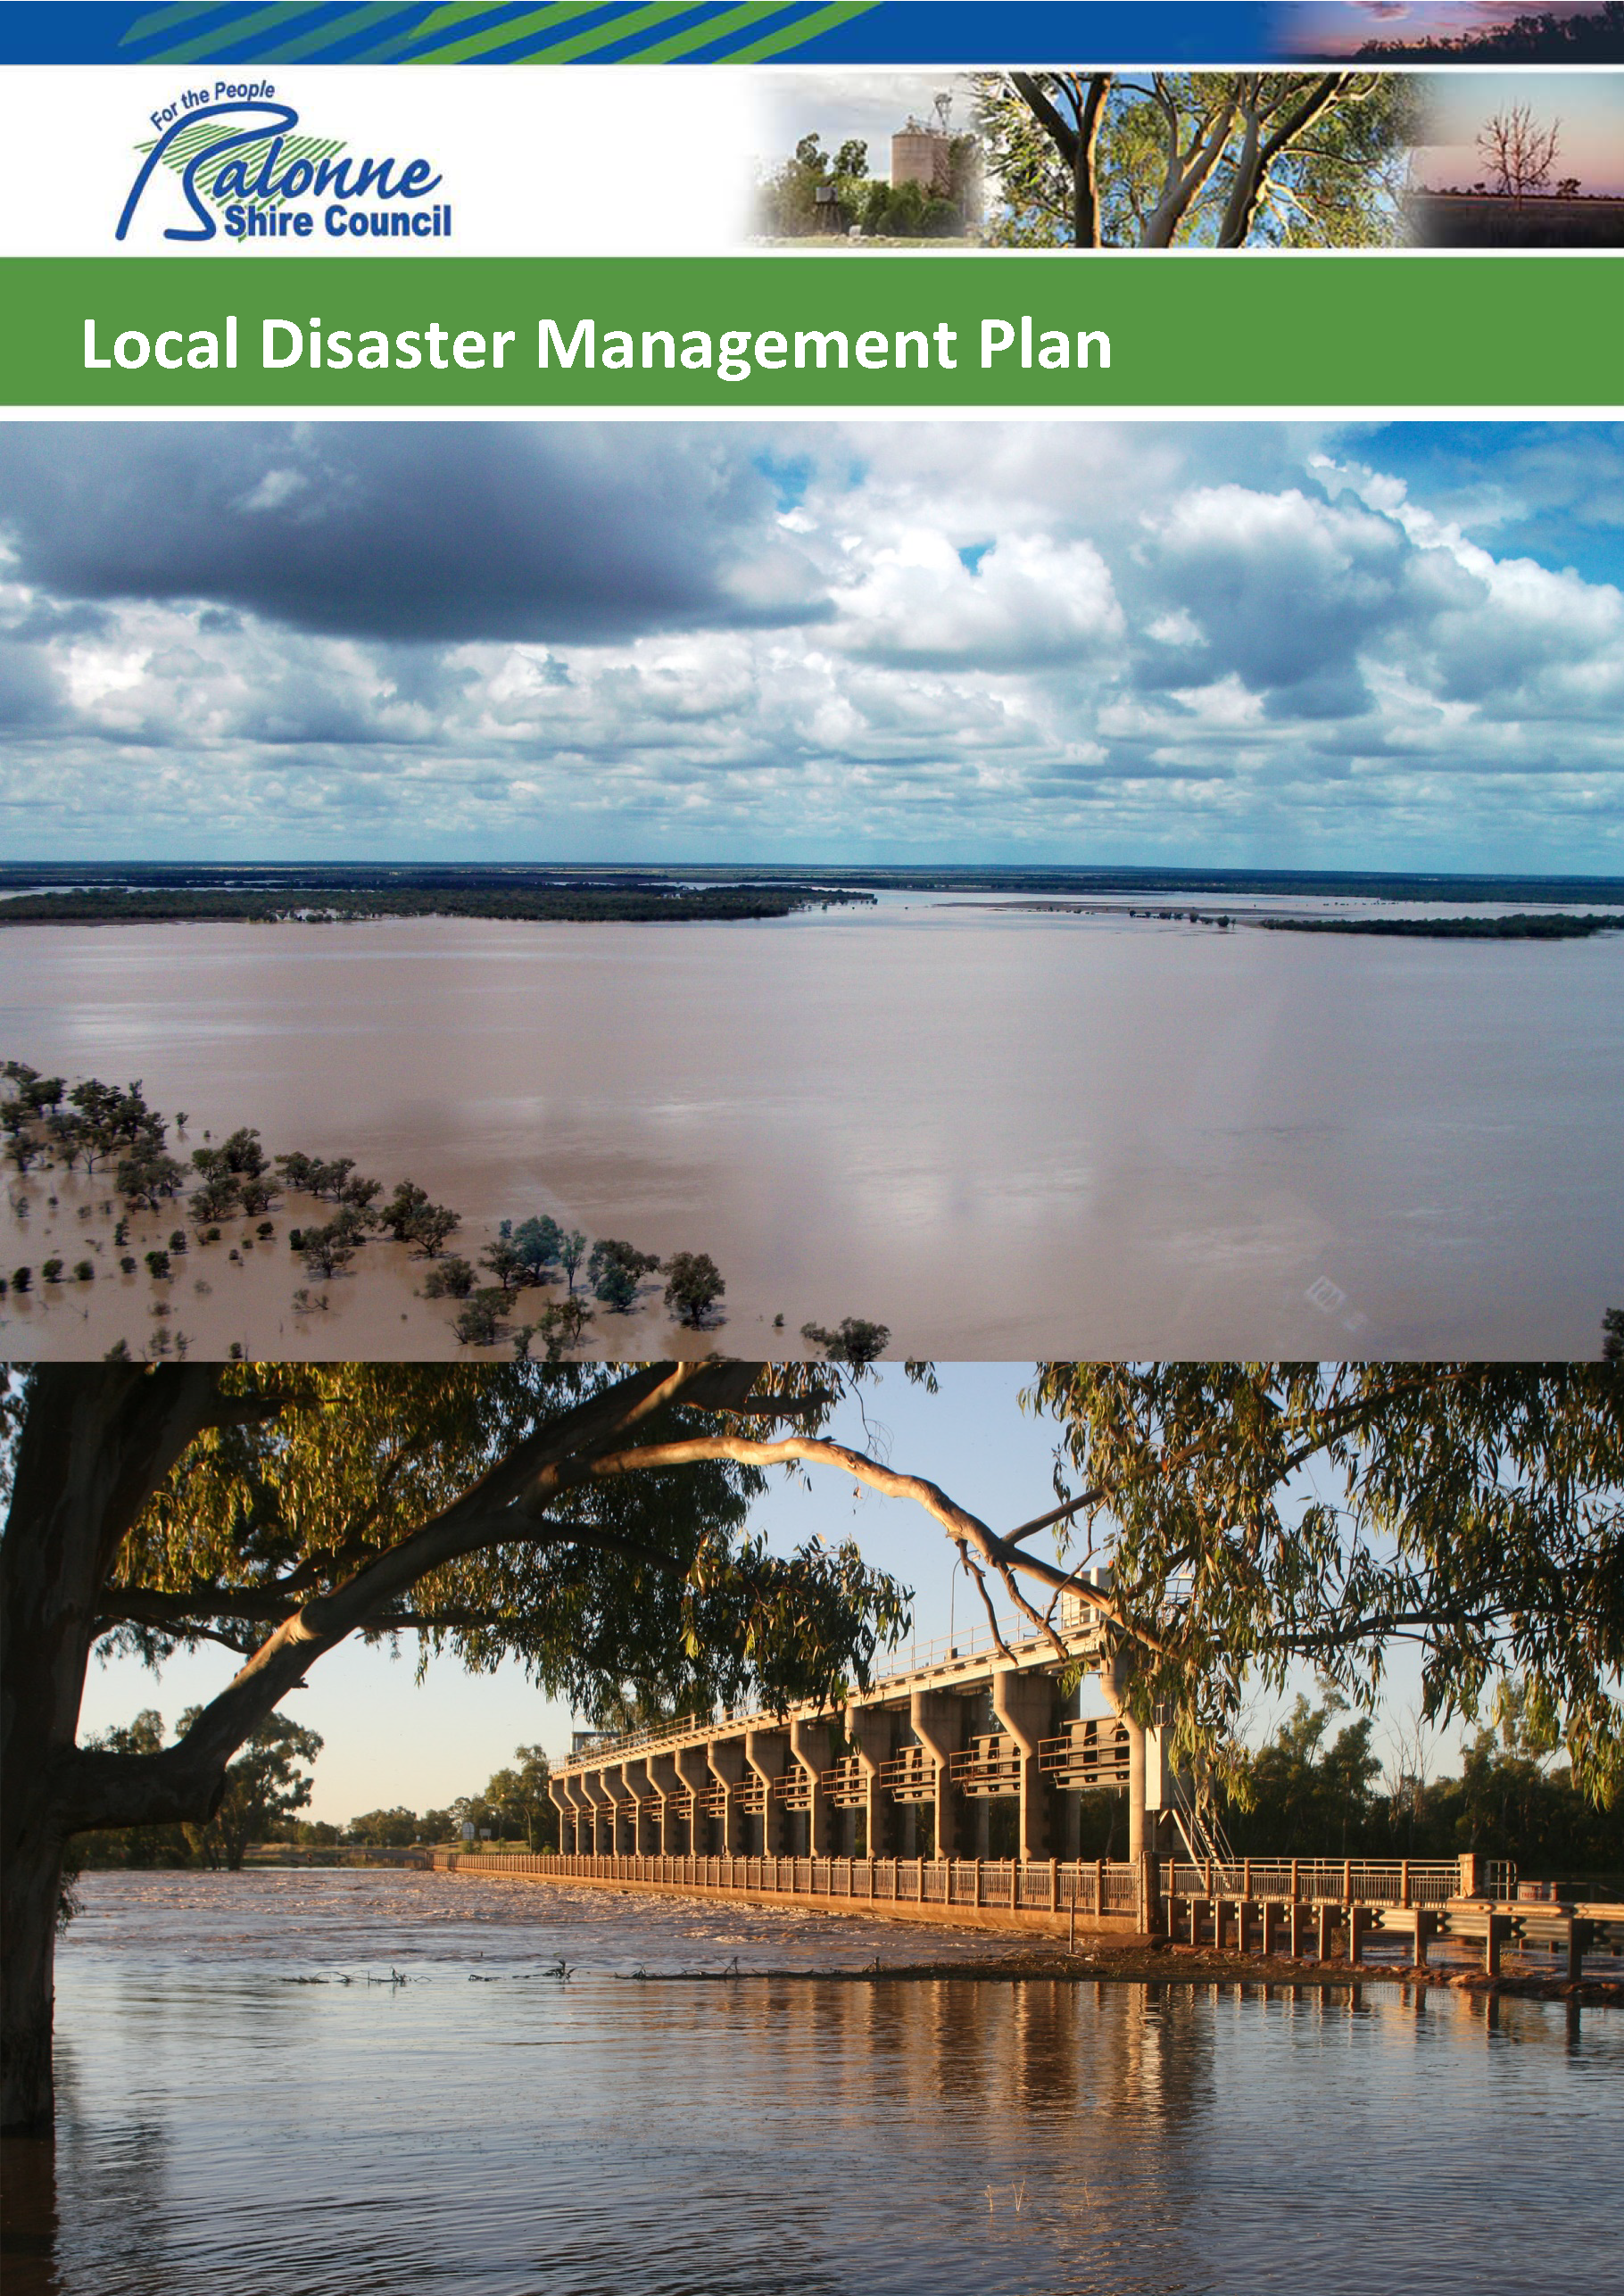 Cover page of the Local Disaster Management Plan. An aerial image of a flooded plain fills the top half of the page; below is an image of a flooded bridge.